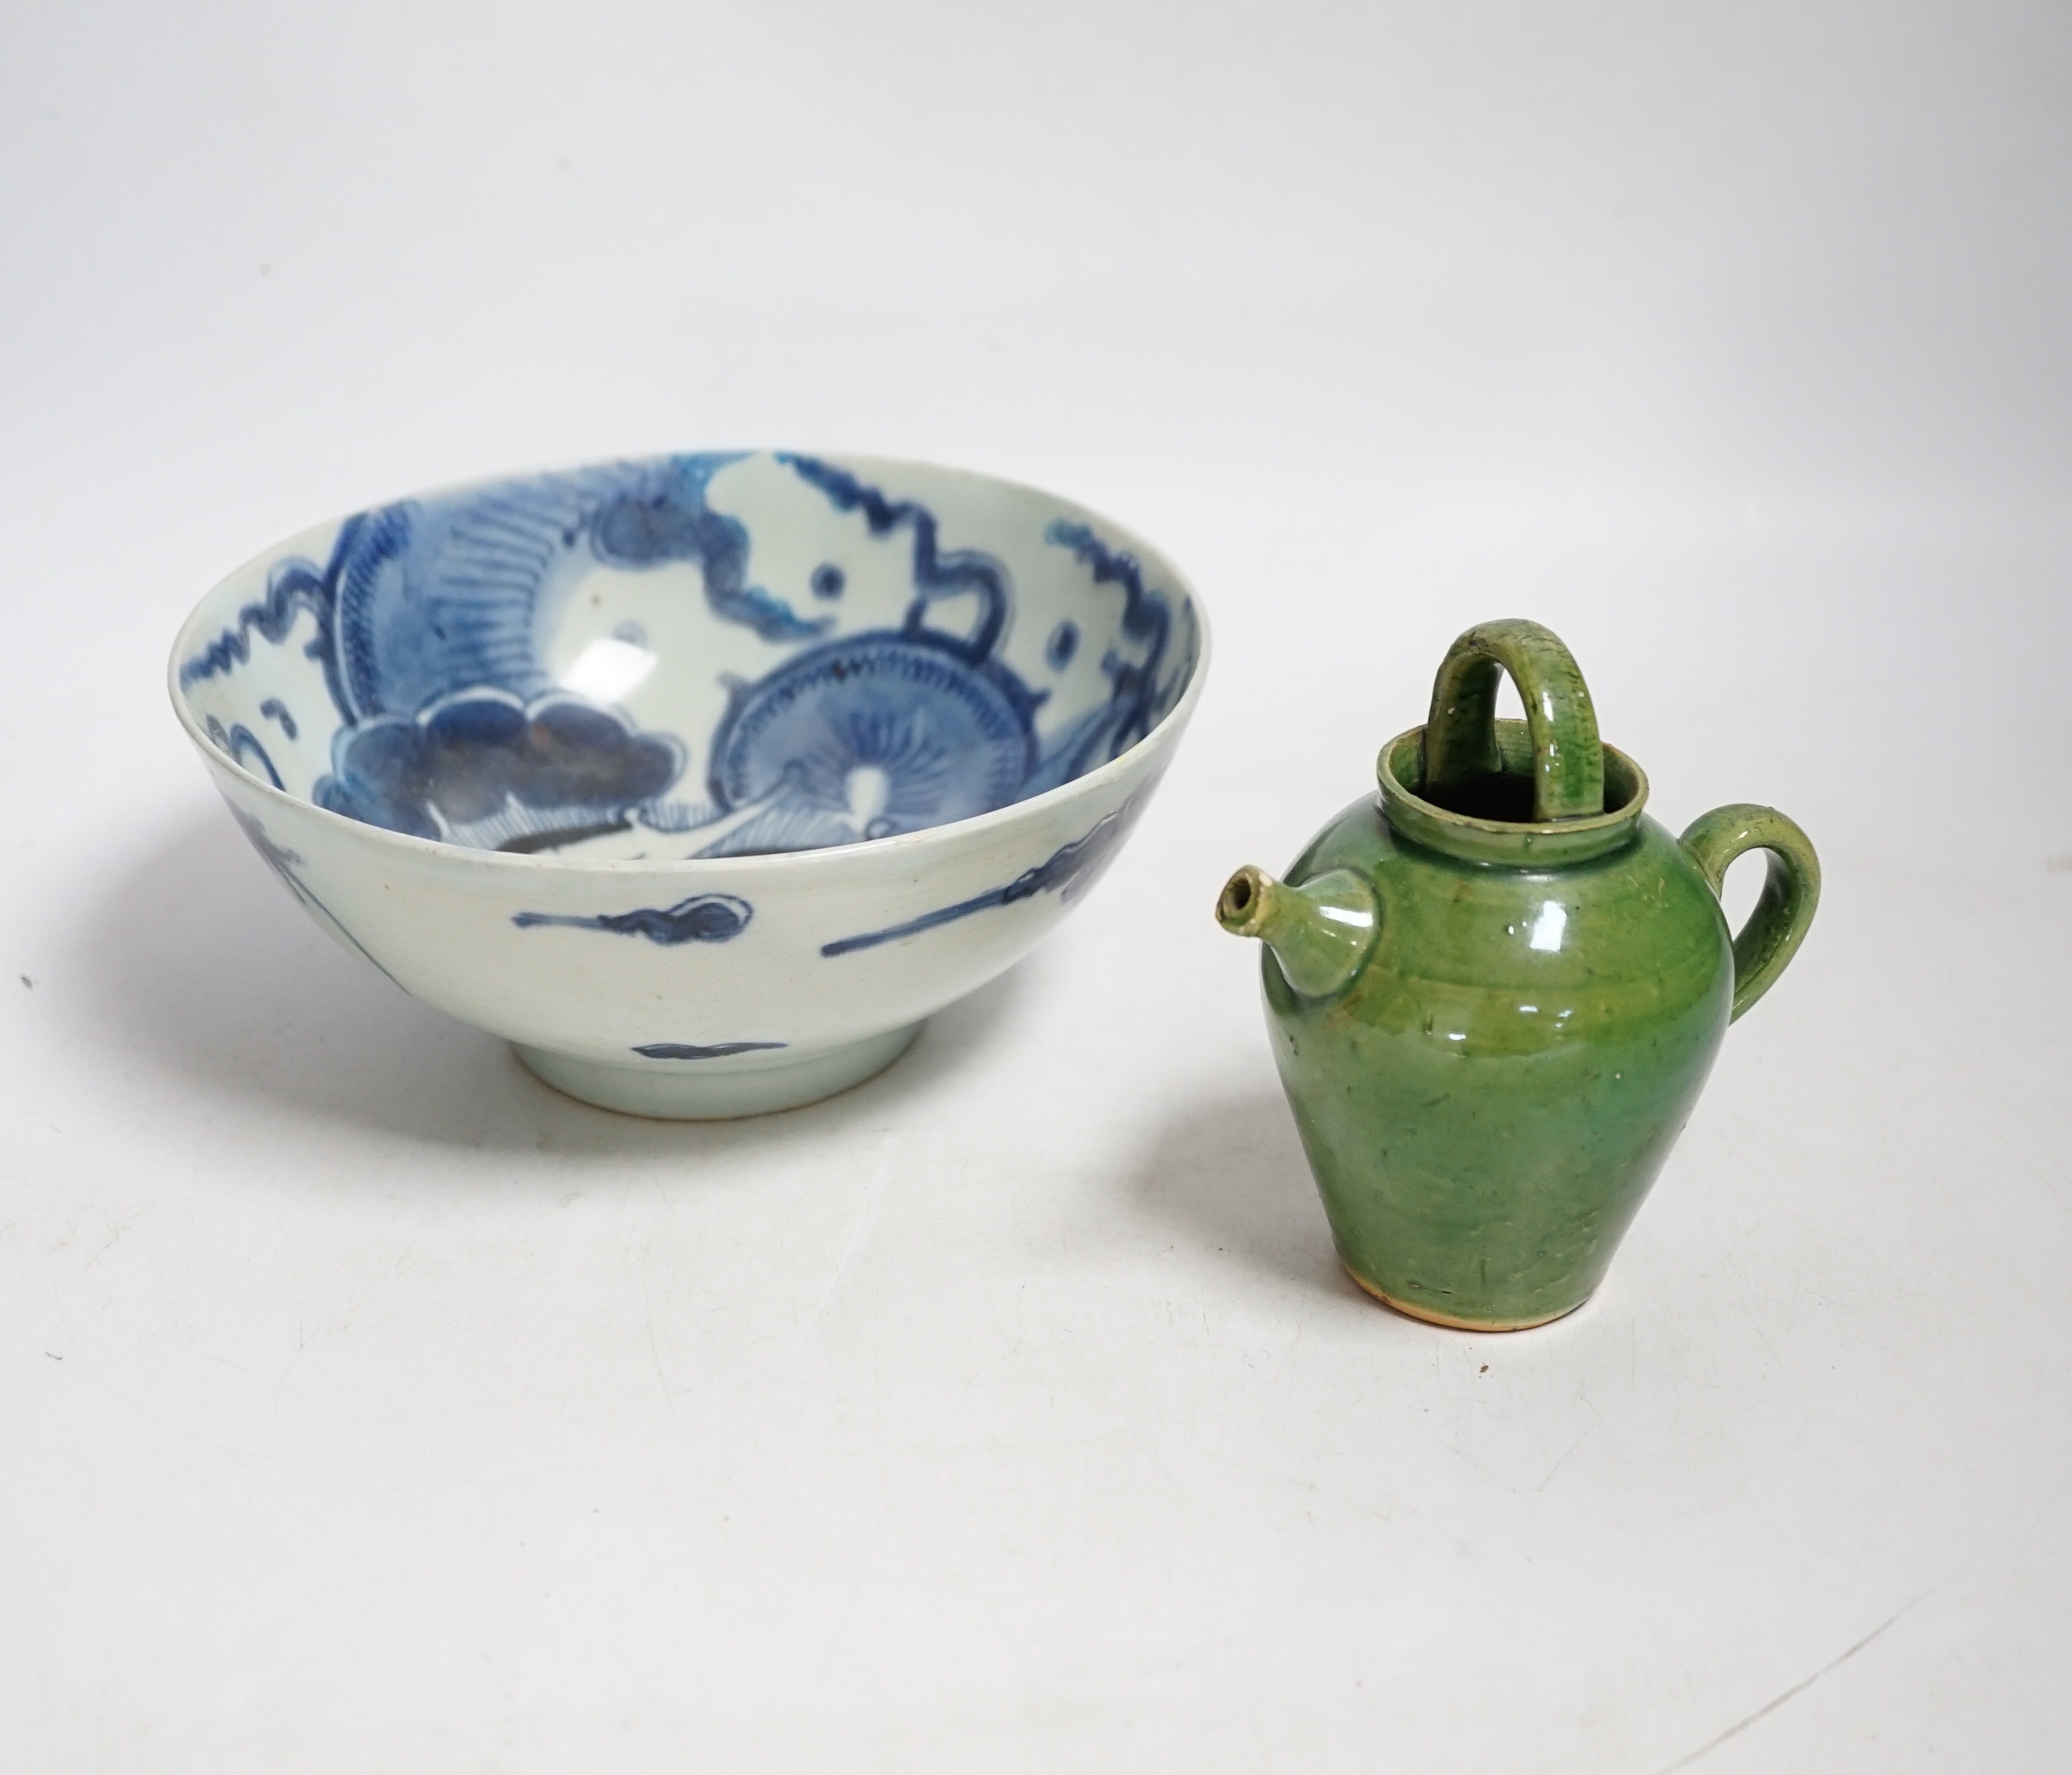 A Chinese blue and white ‘dragon’ bowl and a green glazed water pot, bowl 17.5cm diameter